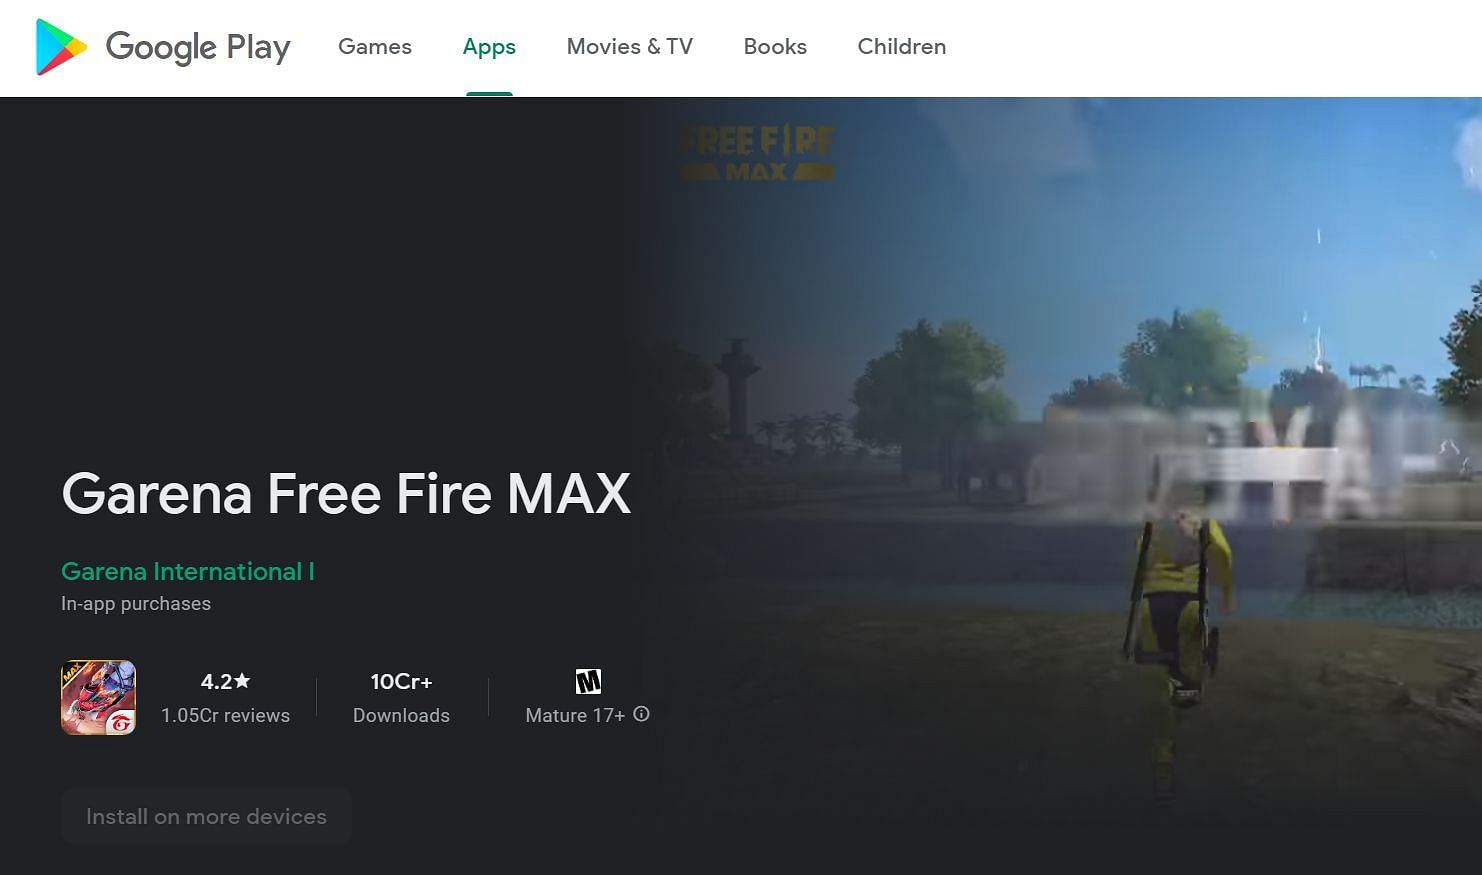 FF MAX on Android (Image via Google Play Store)